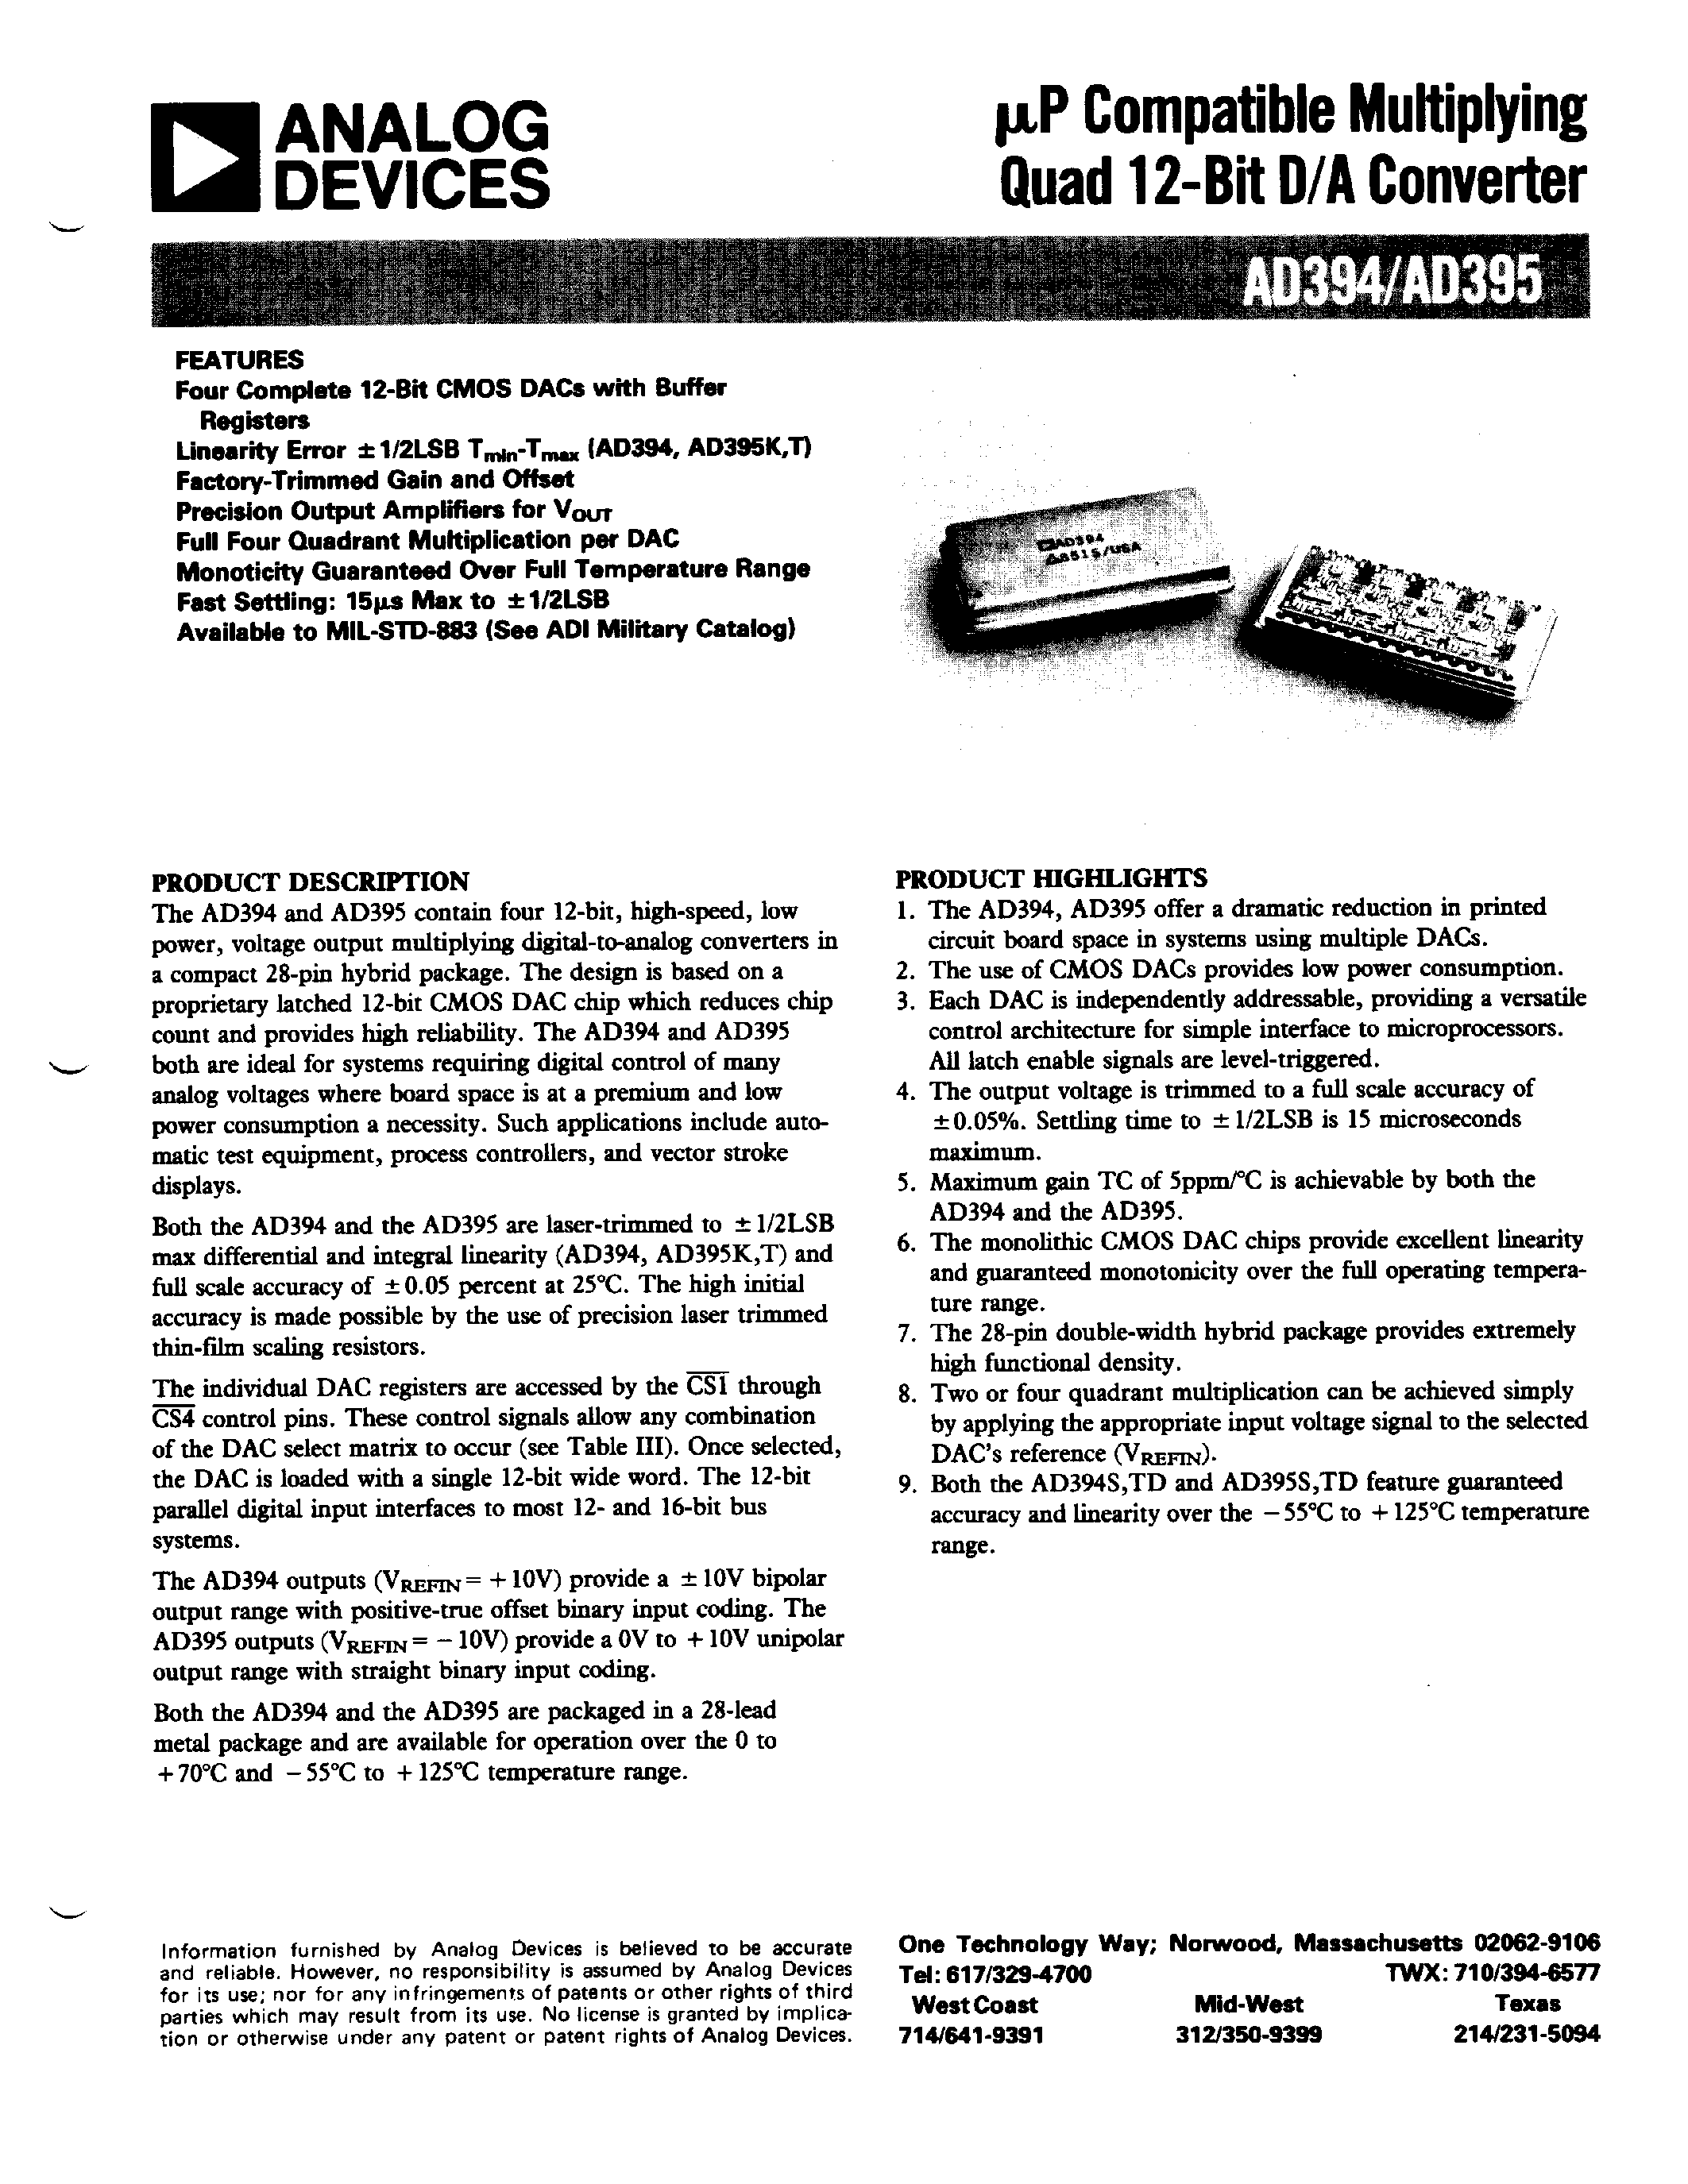 Datasheet AD394KM - uP Compatible Multiplying Quad 12-Bit D/A Converter page 1